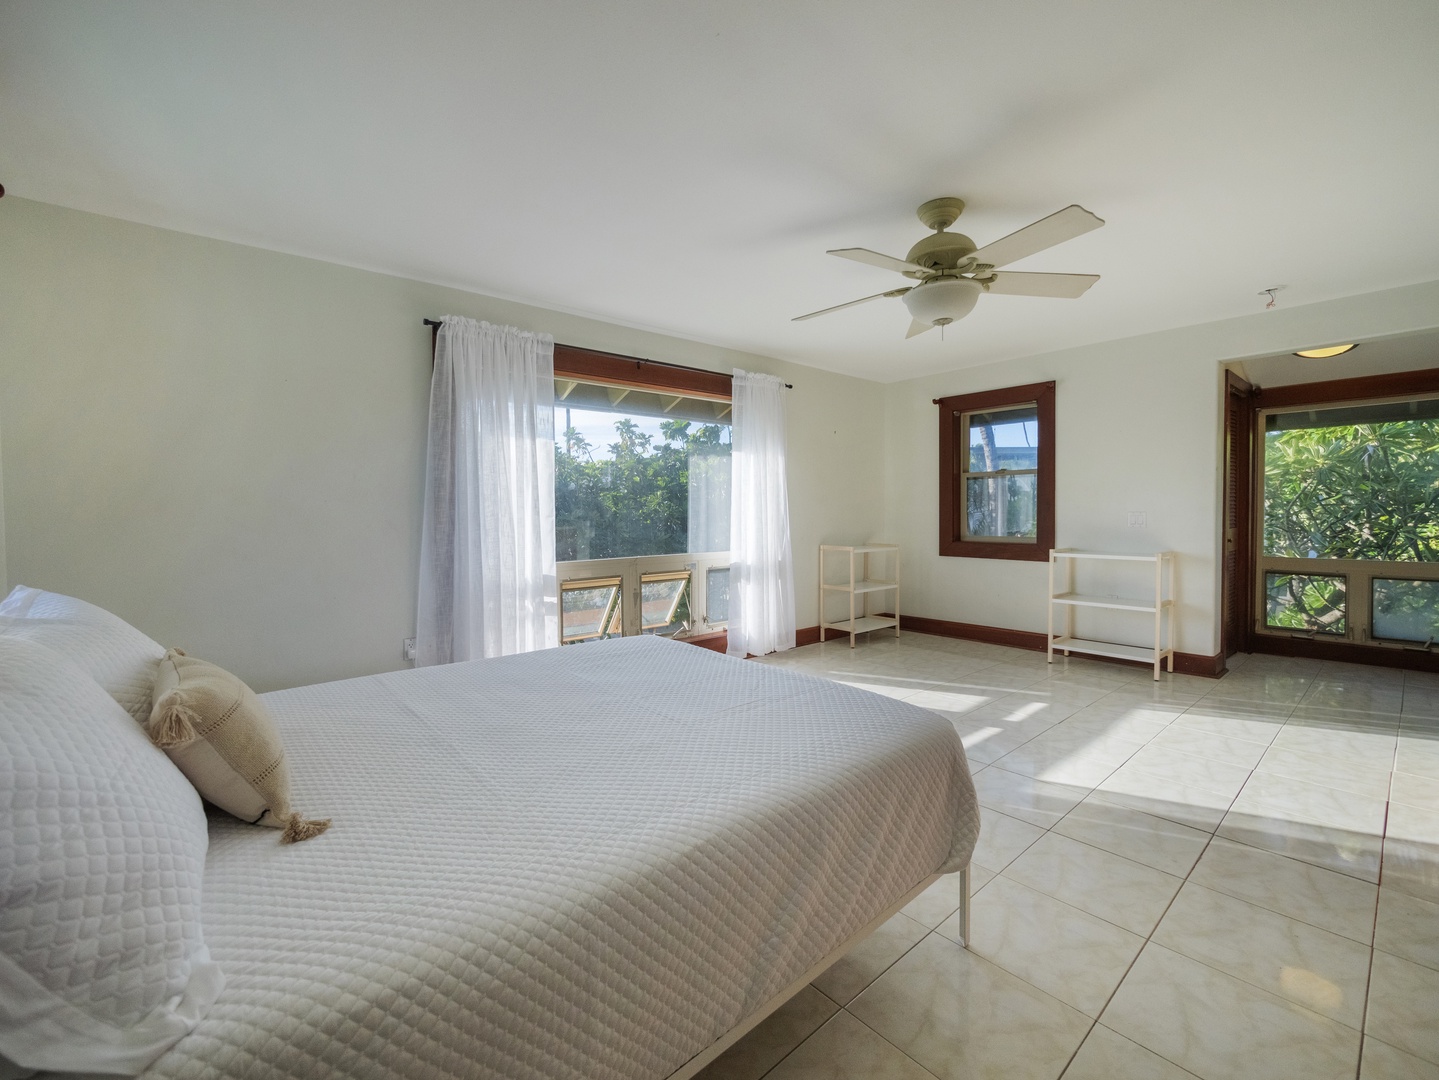 Waianae Vacation Rentals, Konishiki Beachhouse - Spacious guest suite with natural lights coming in.